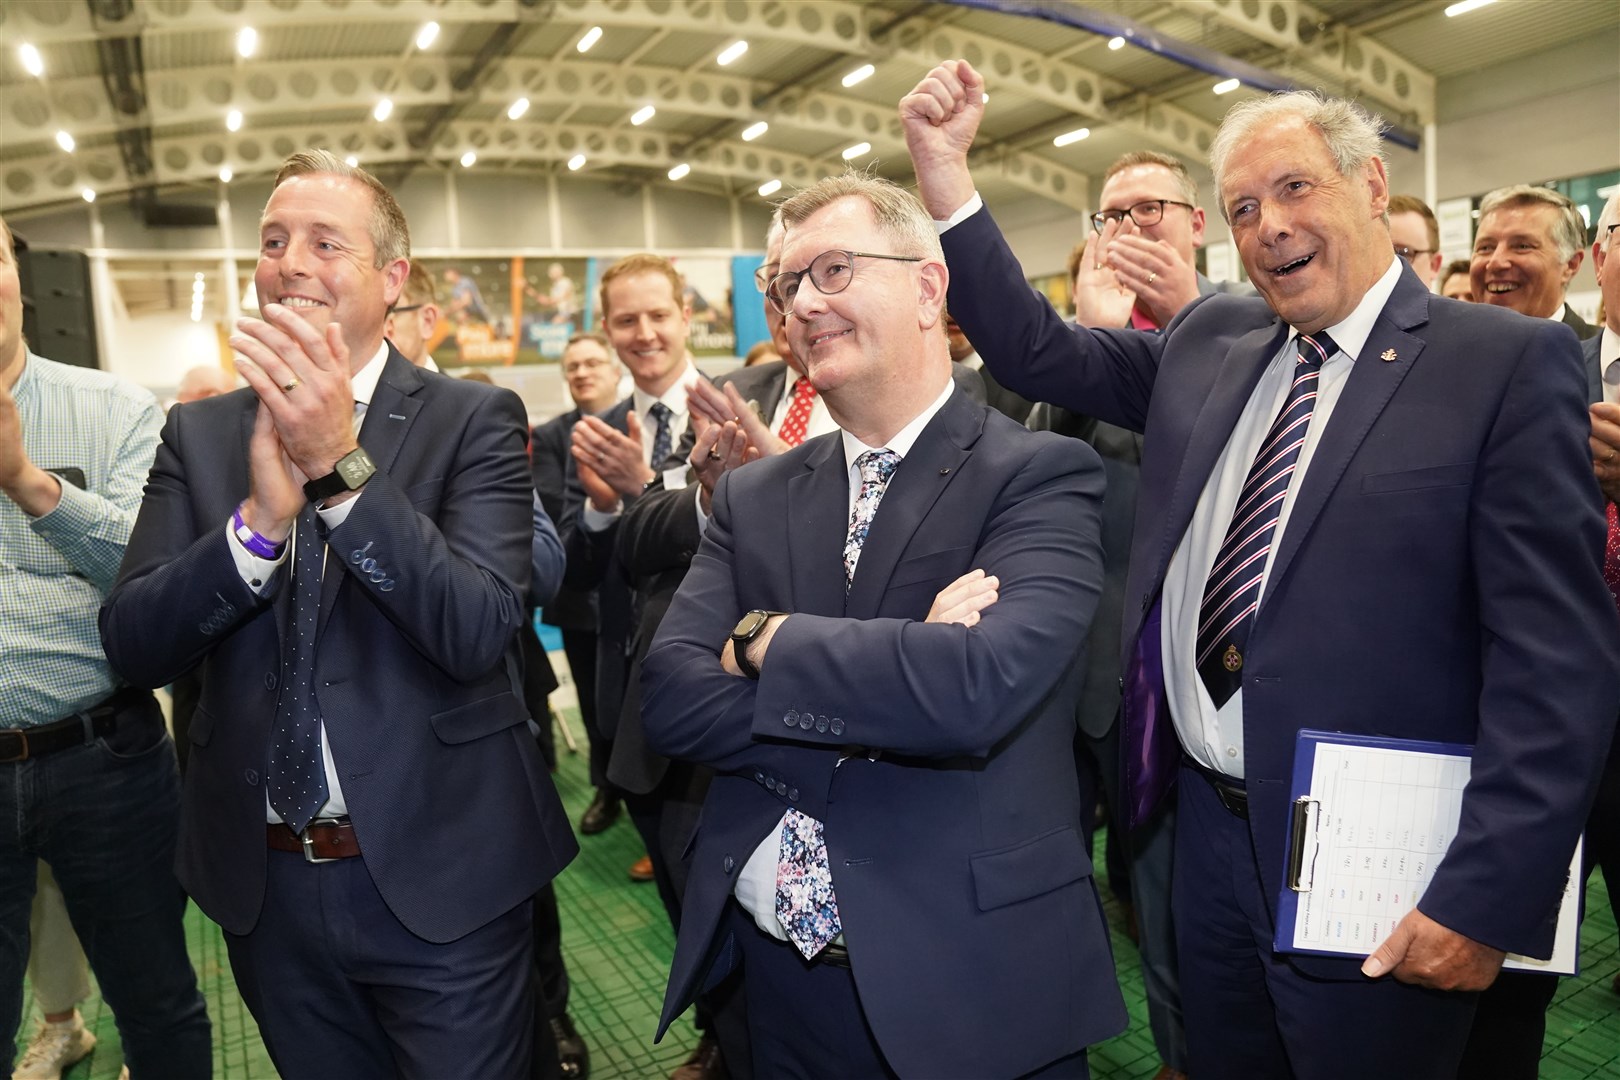 DUP leader Sir Jeffrey Donaldson is elected for the Lagan Valley constituency (Brian Lawless/PA)